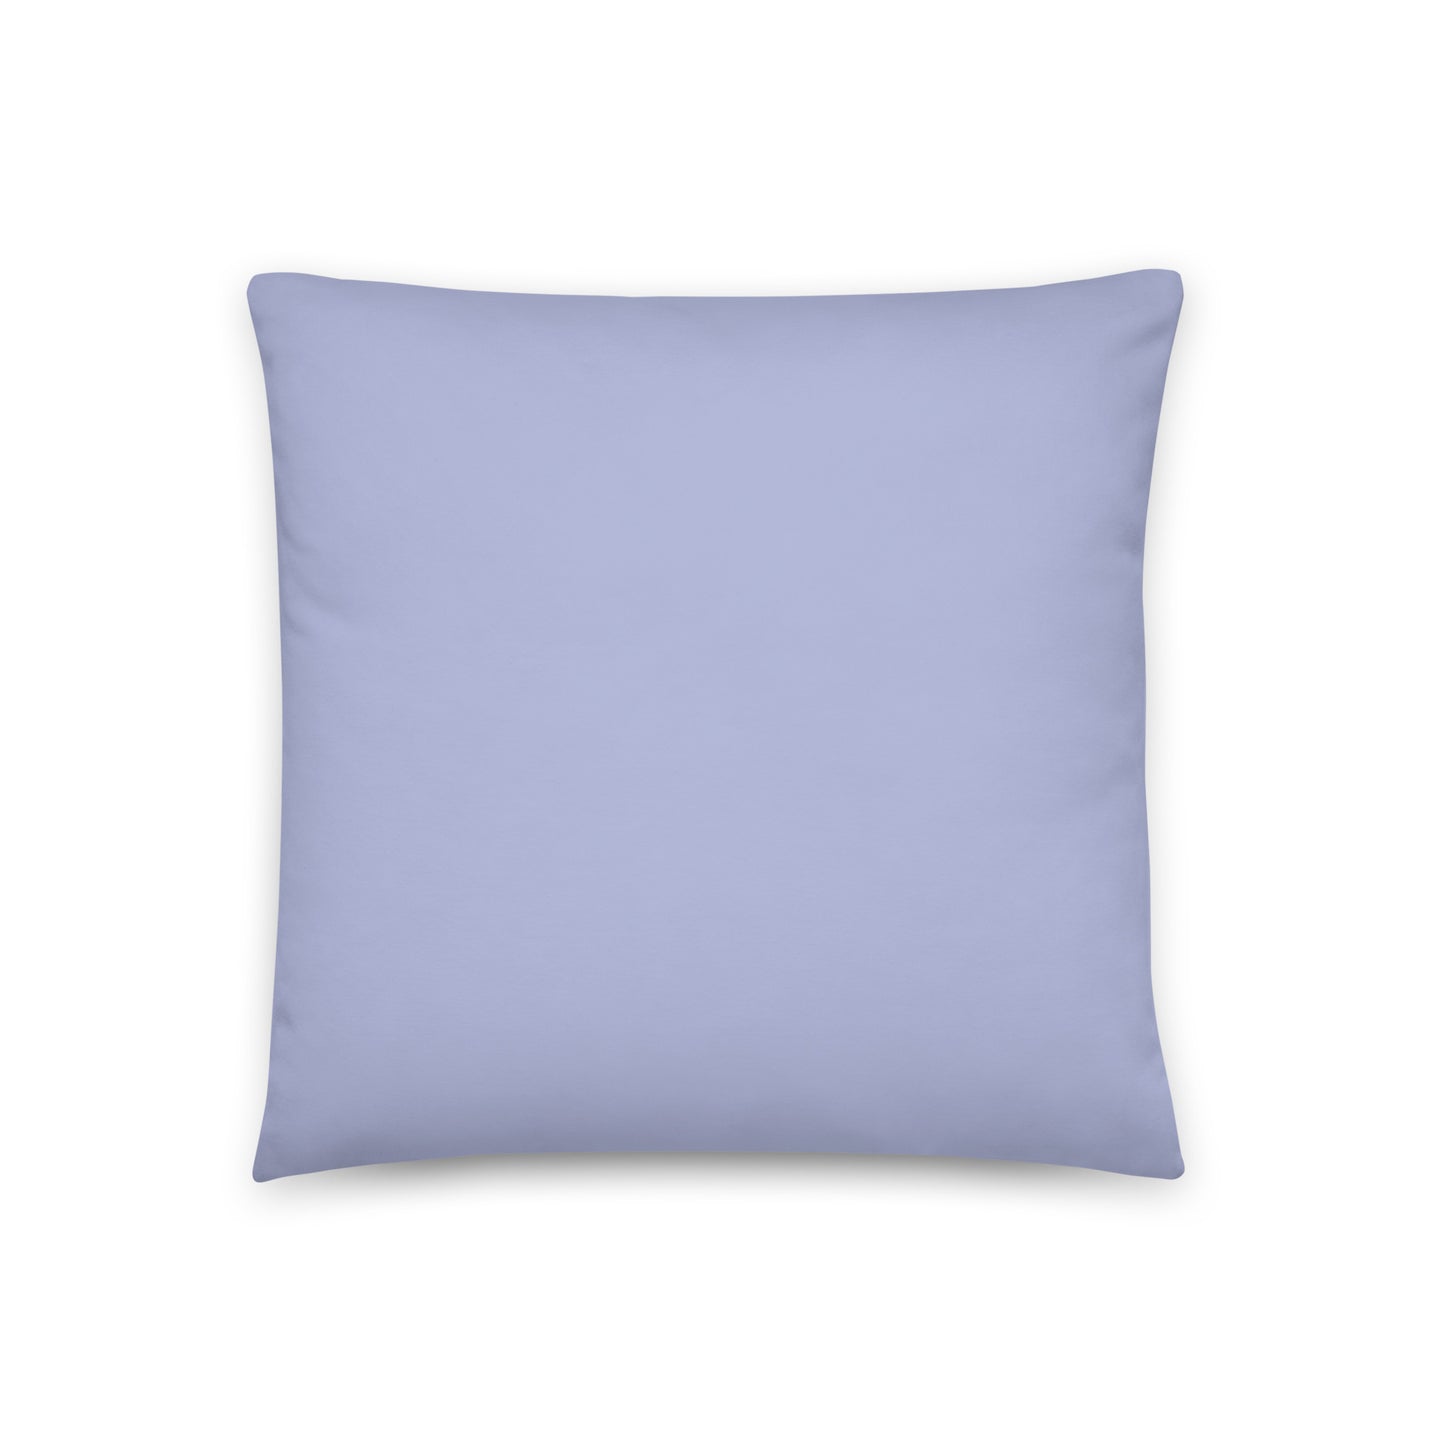 *New arrival! Wisteria Pillow